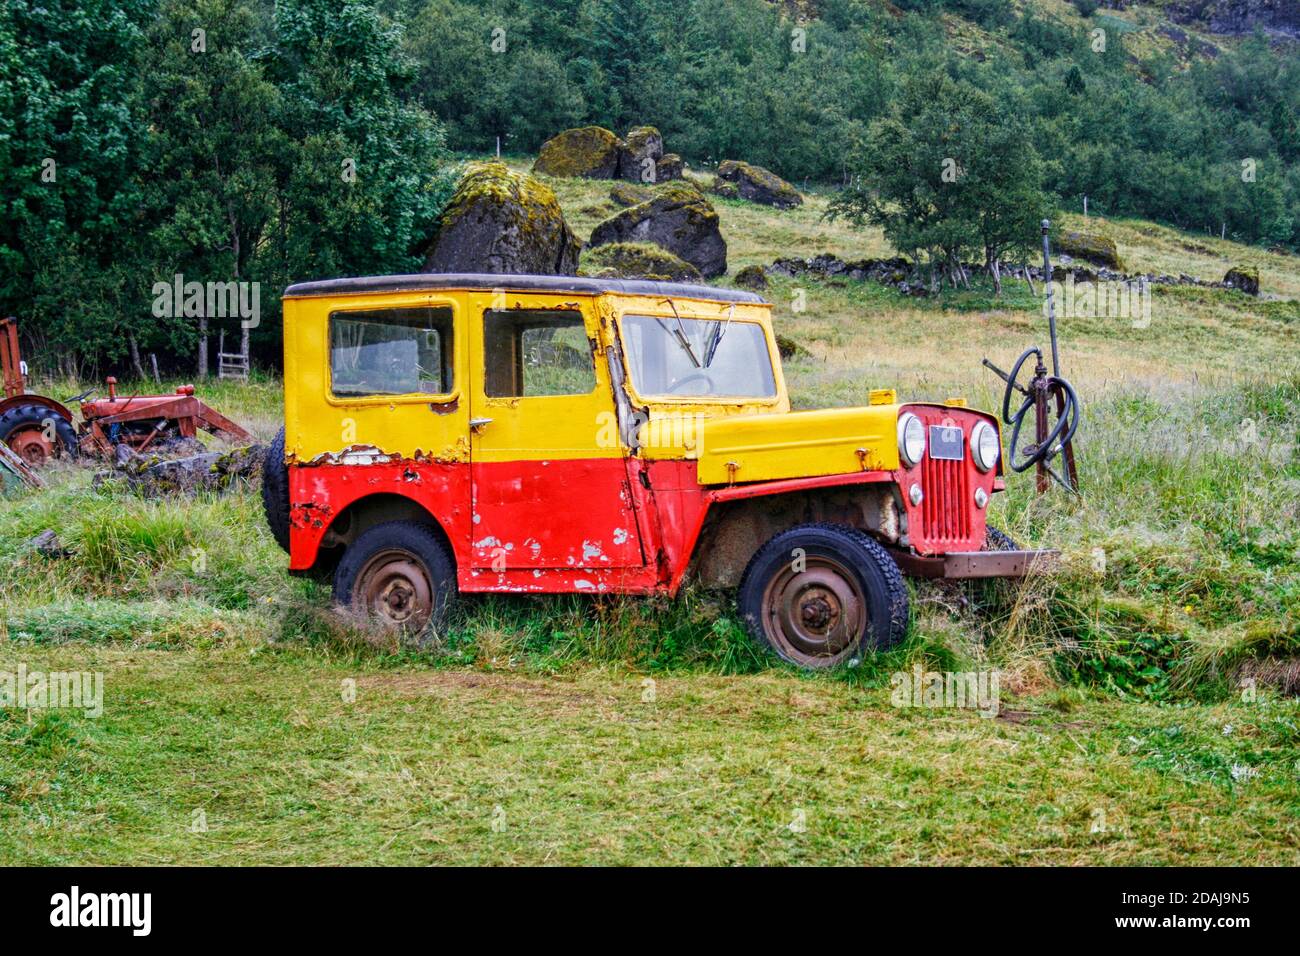 Old and weathered truck in yellow and red in rural landscape Stock Photo